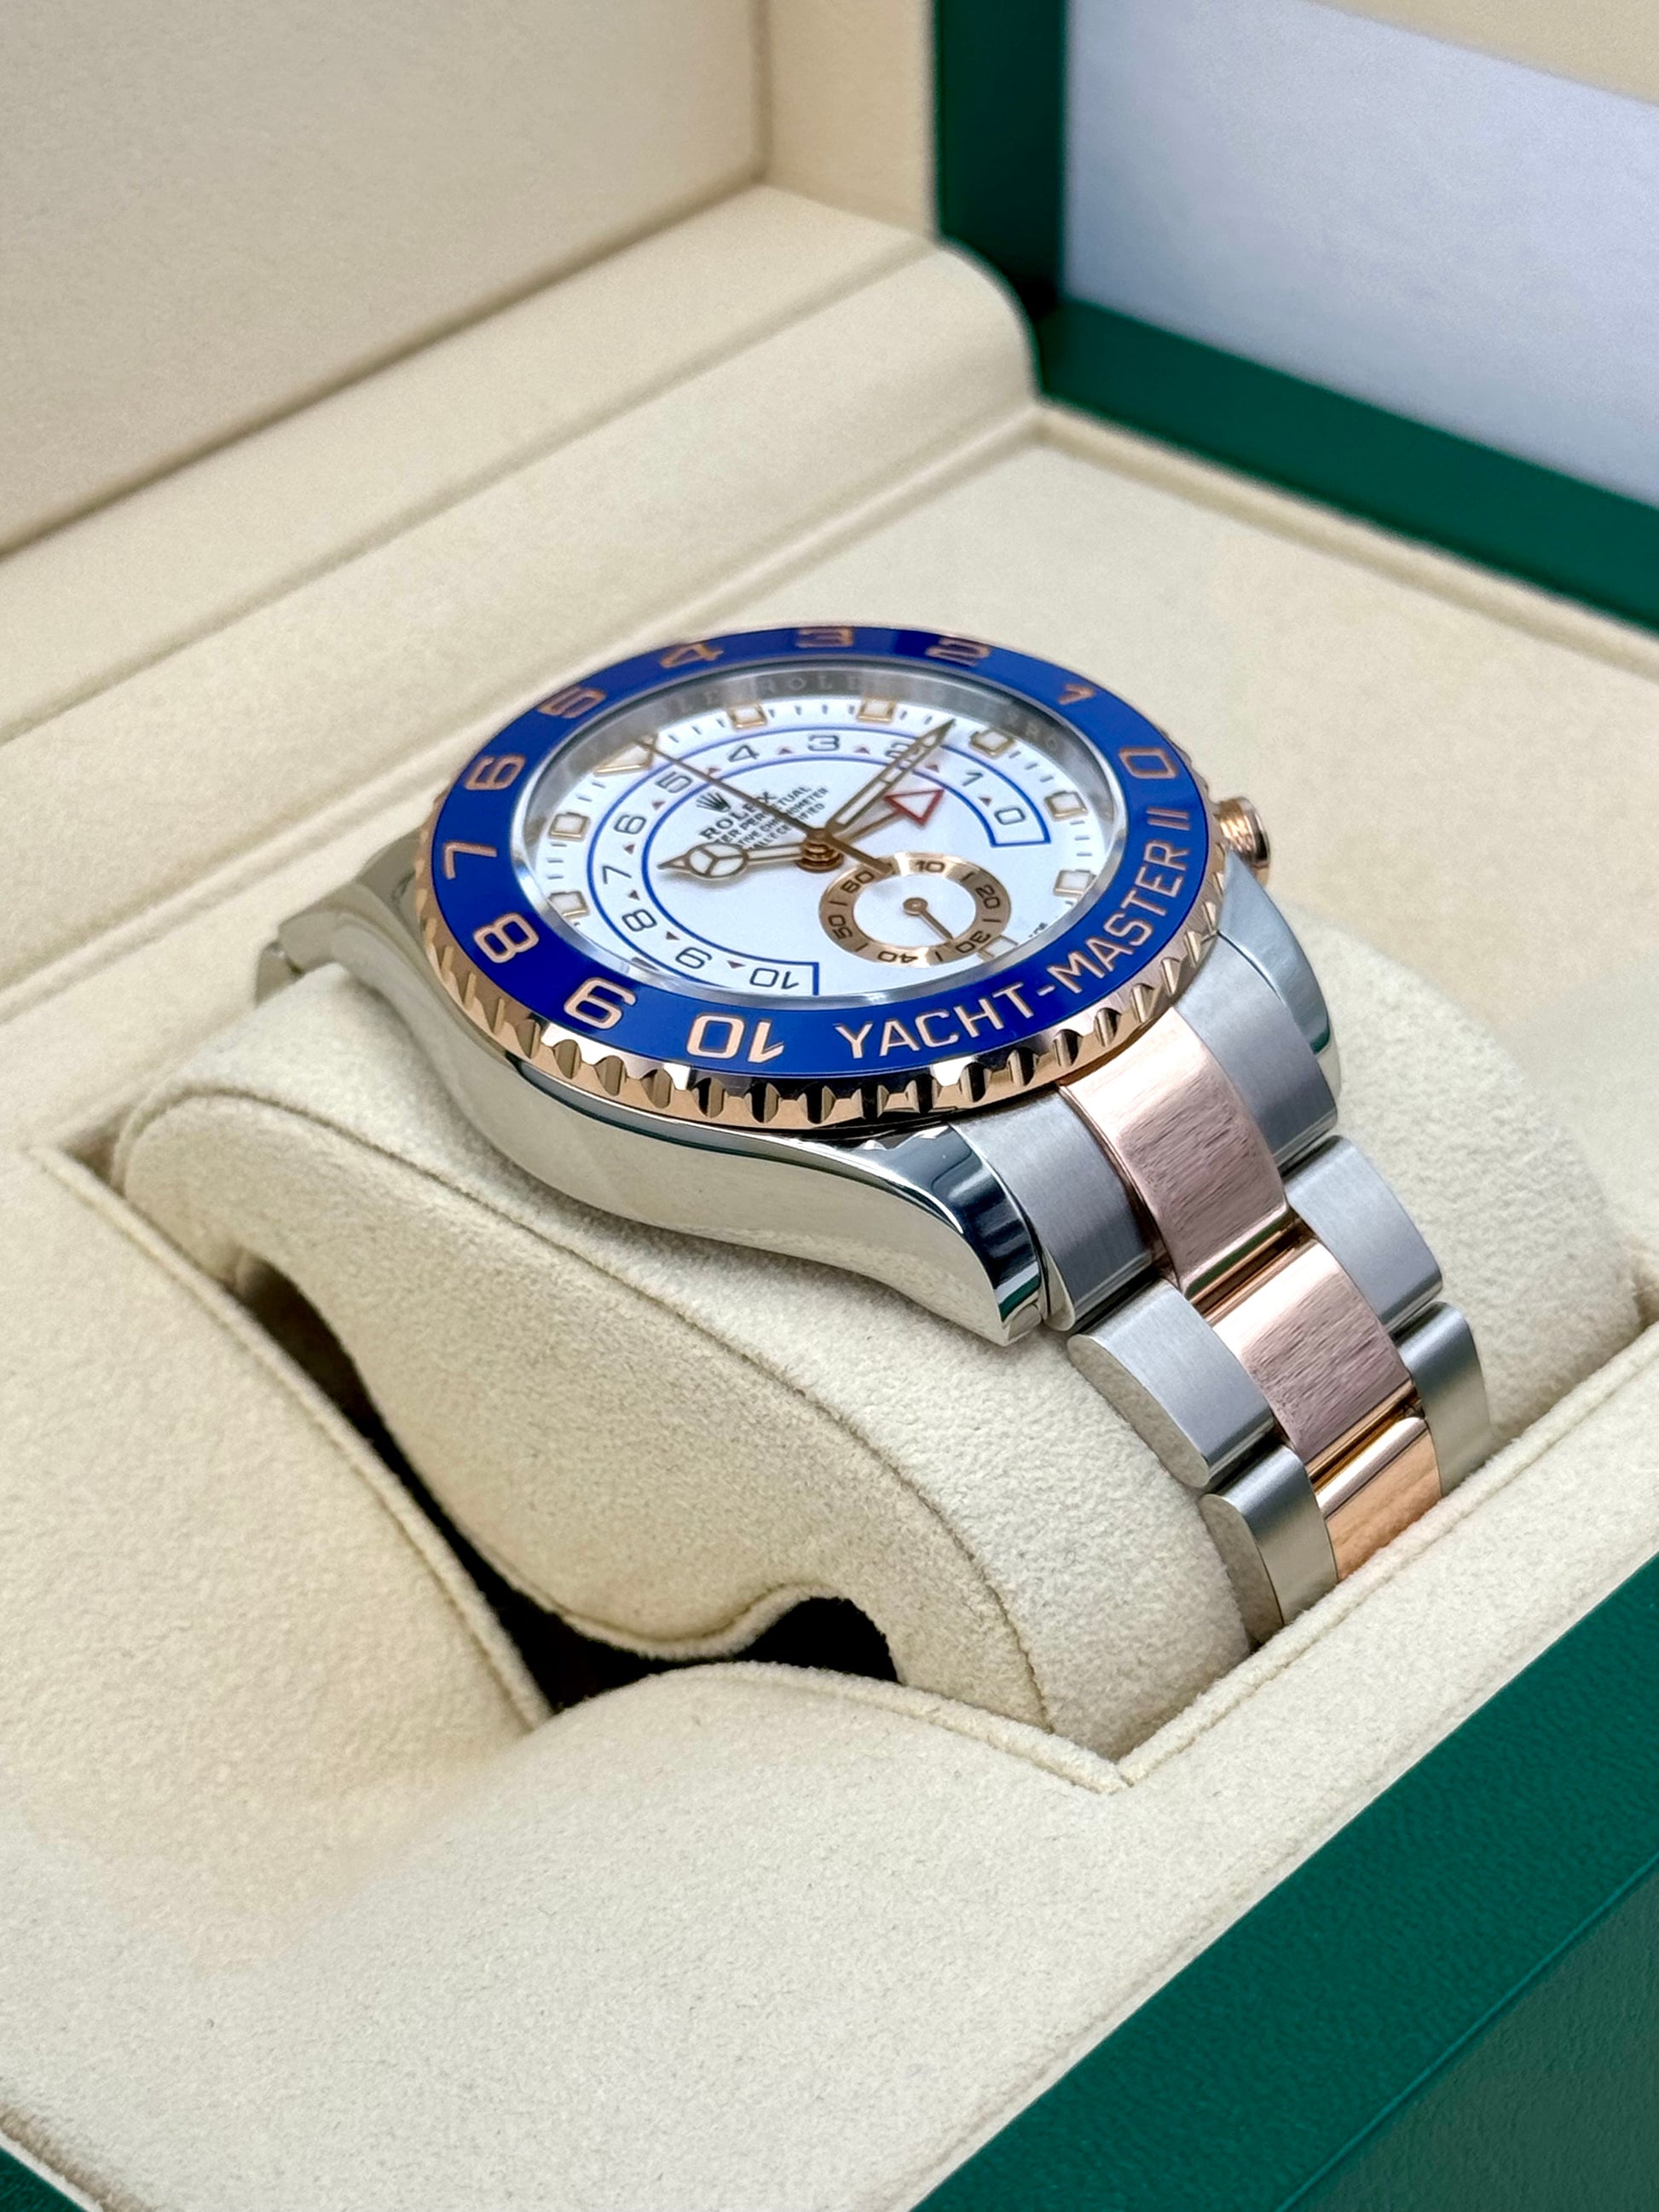 2018 Rolex Yacht-Master II 44mm 116681 Two-Tone White Dial - MyWatchLLC